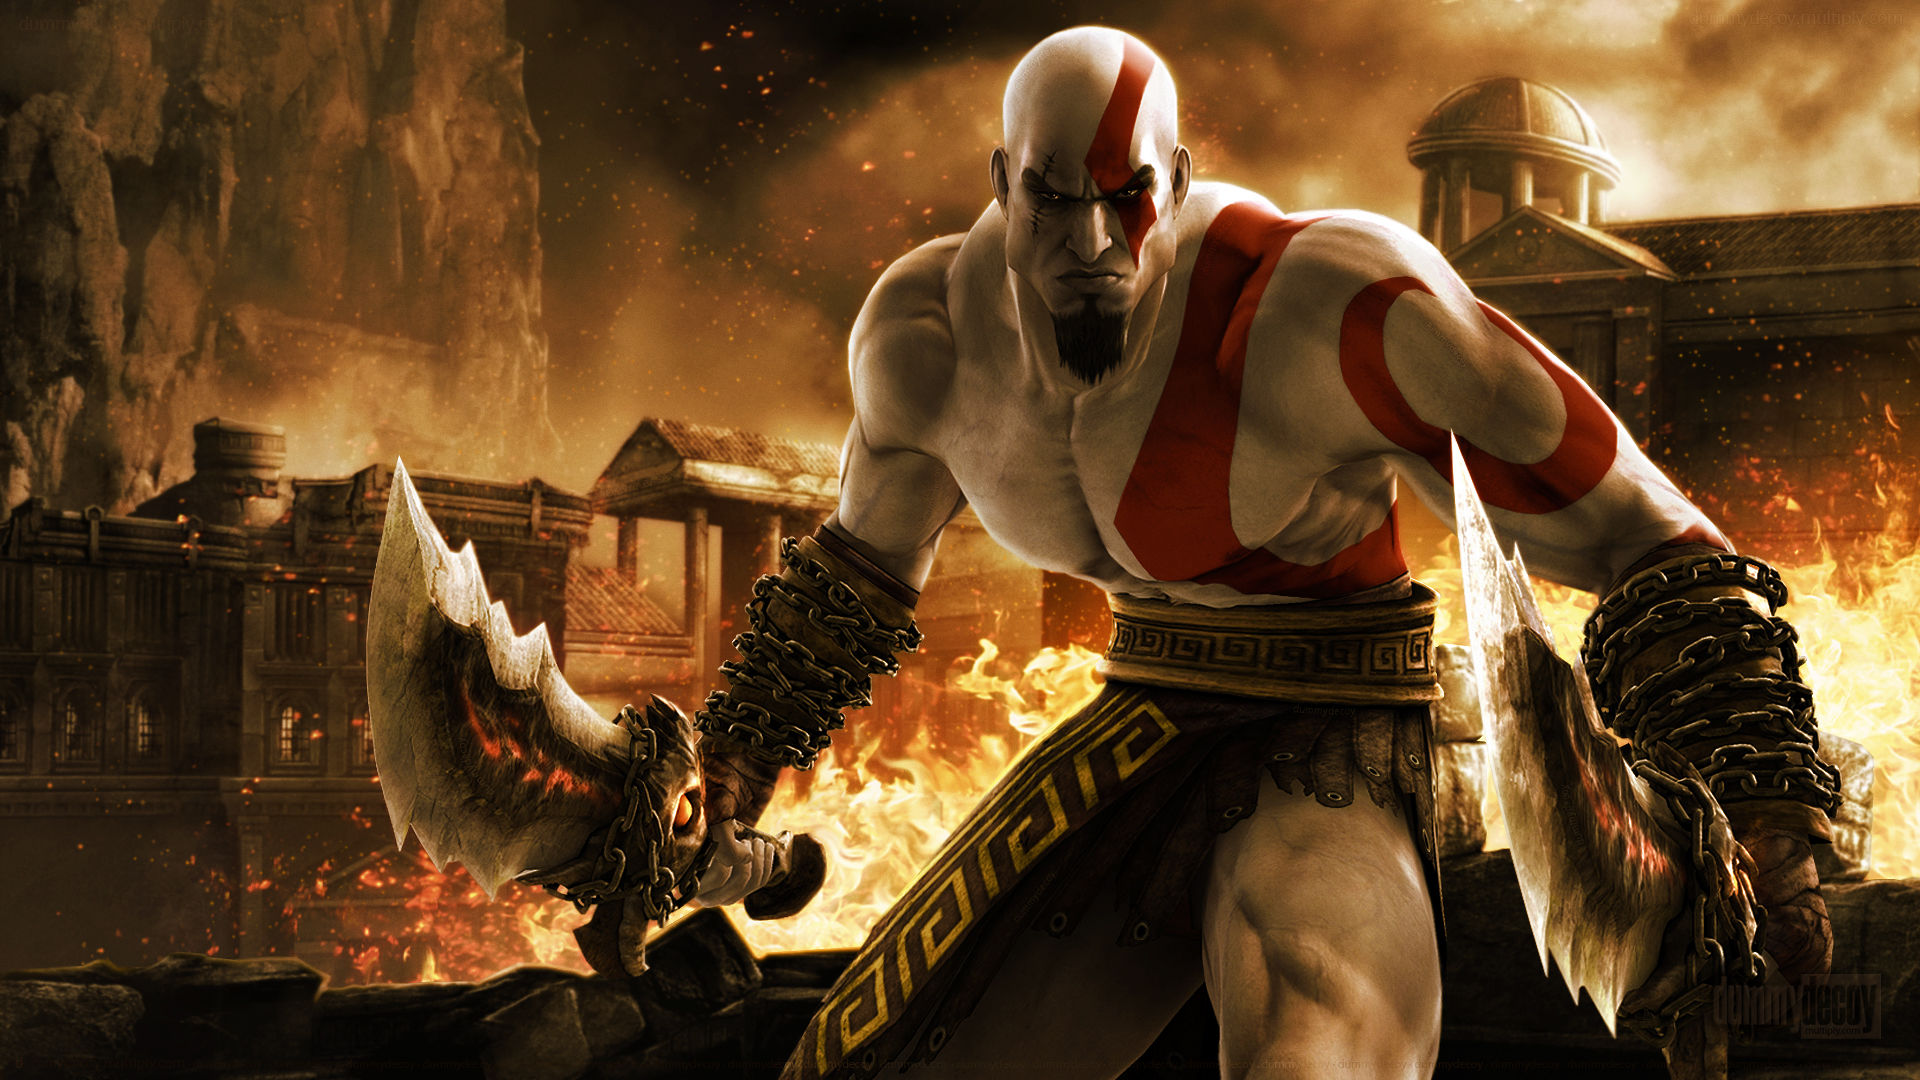 ps2 god of war 3 iso